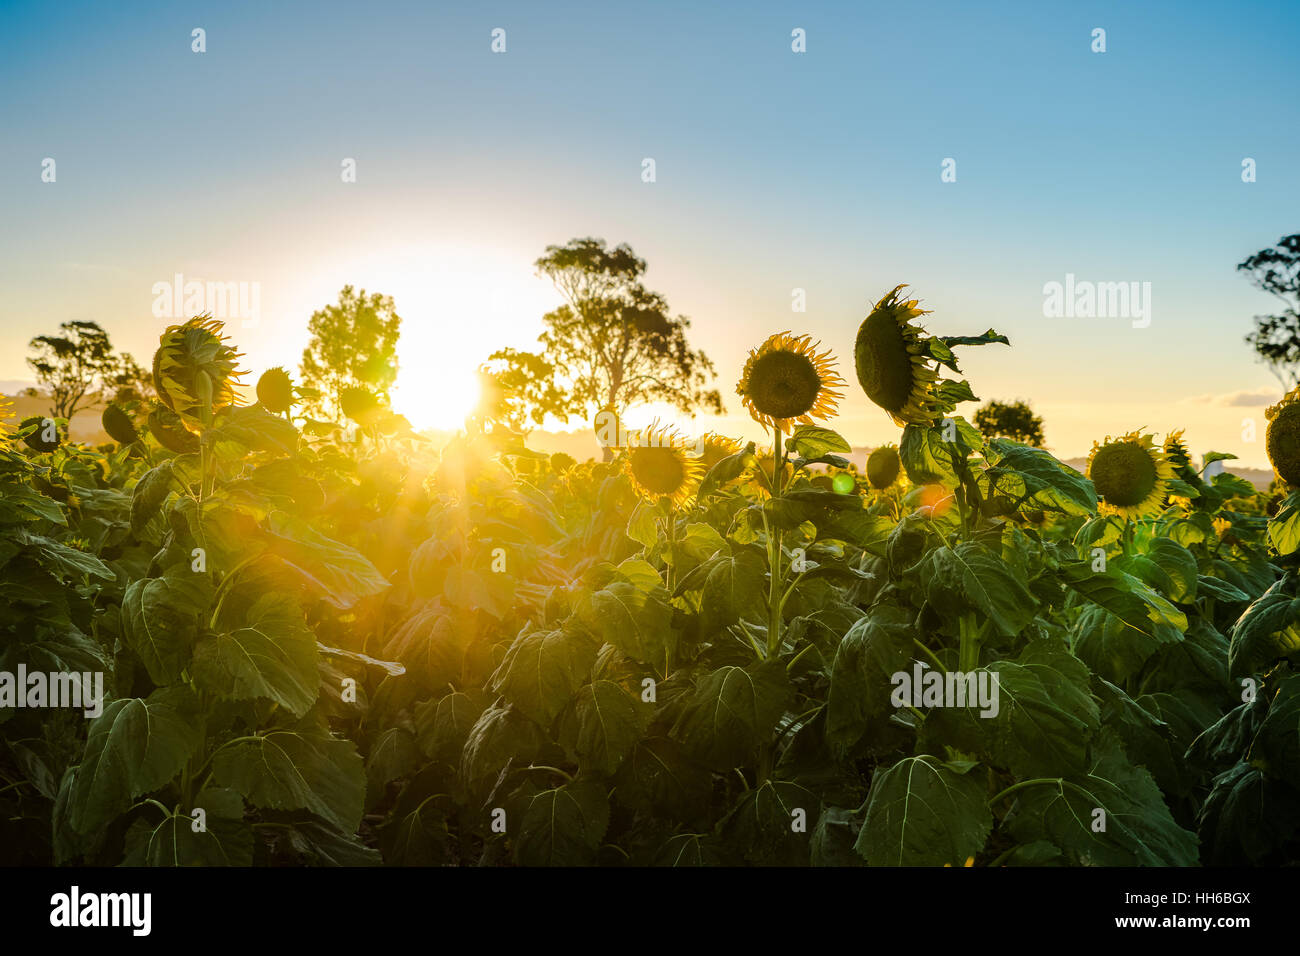 Sunset and the Sun breaking through the field of sunflowers Stock Photo